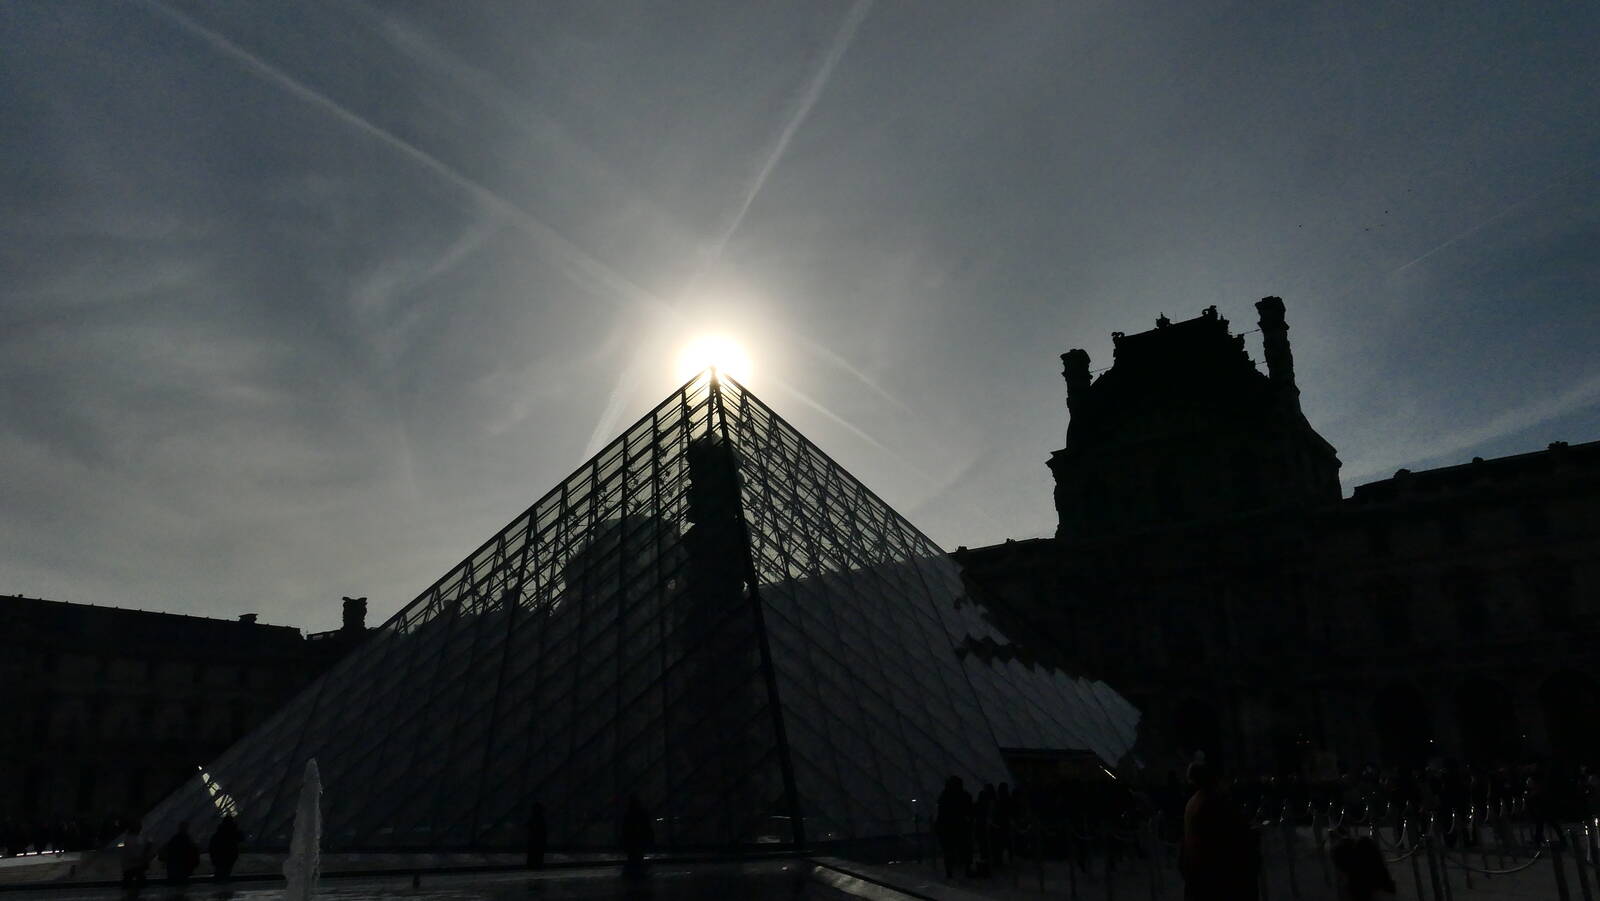 Image of Pyramide du Louvre (Louvre Exterior) by Jeff Abramowitz